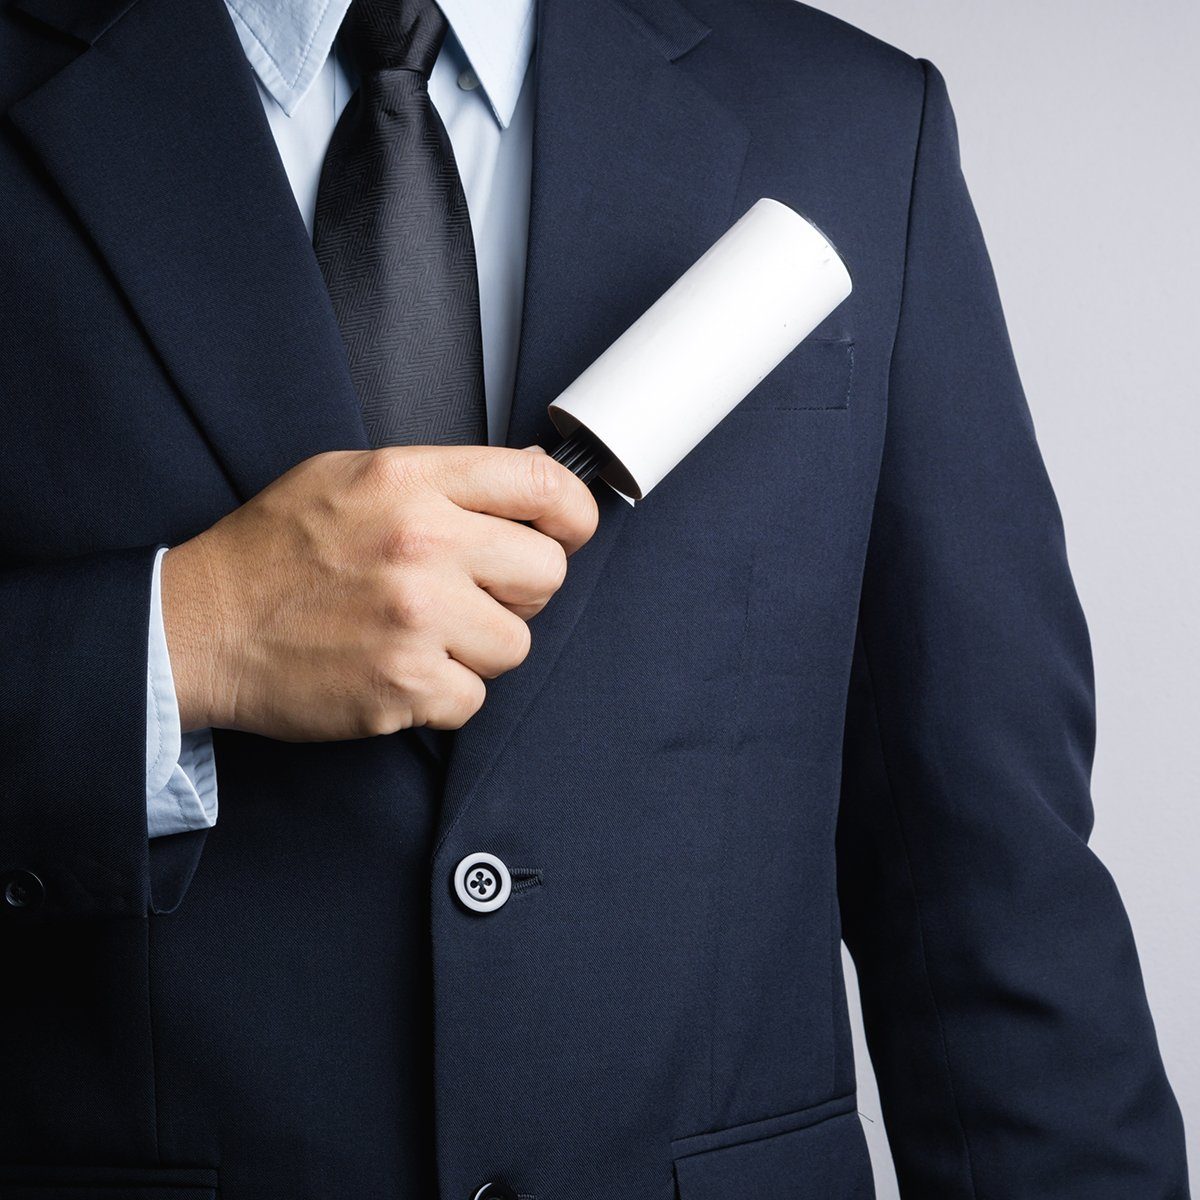 Business man cleaning his suit with adhesive lint roller on white background